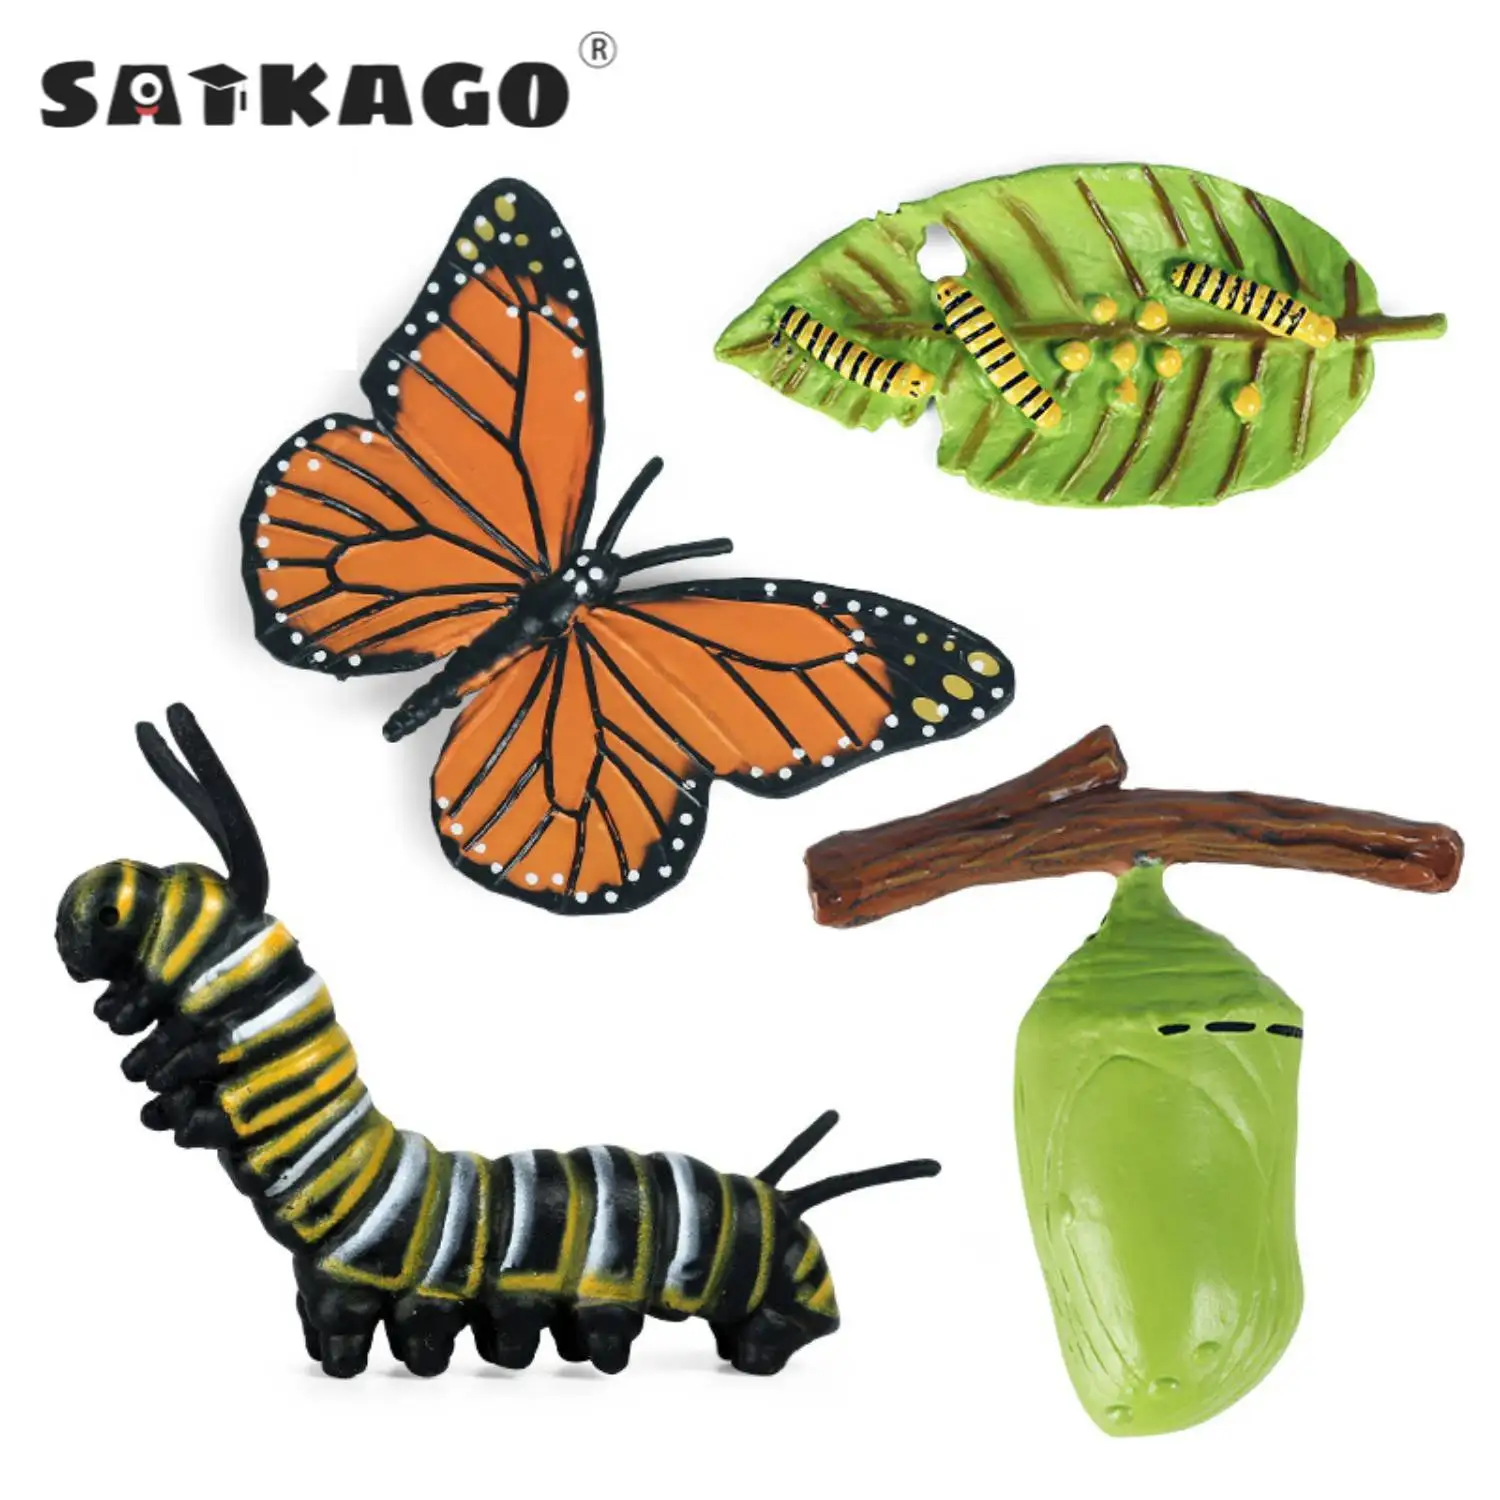 

Simulation Life Cycle Figurine of a Monarch Butterfly Growth Cycle Insect Animals Action Figures Educational Biology Science Toy